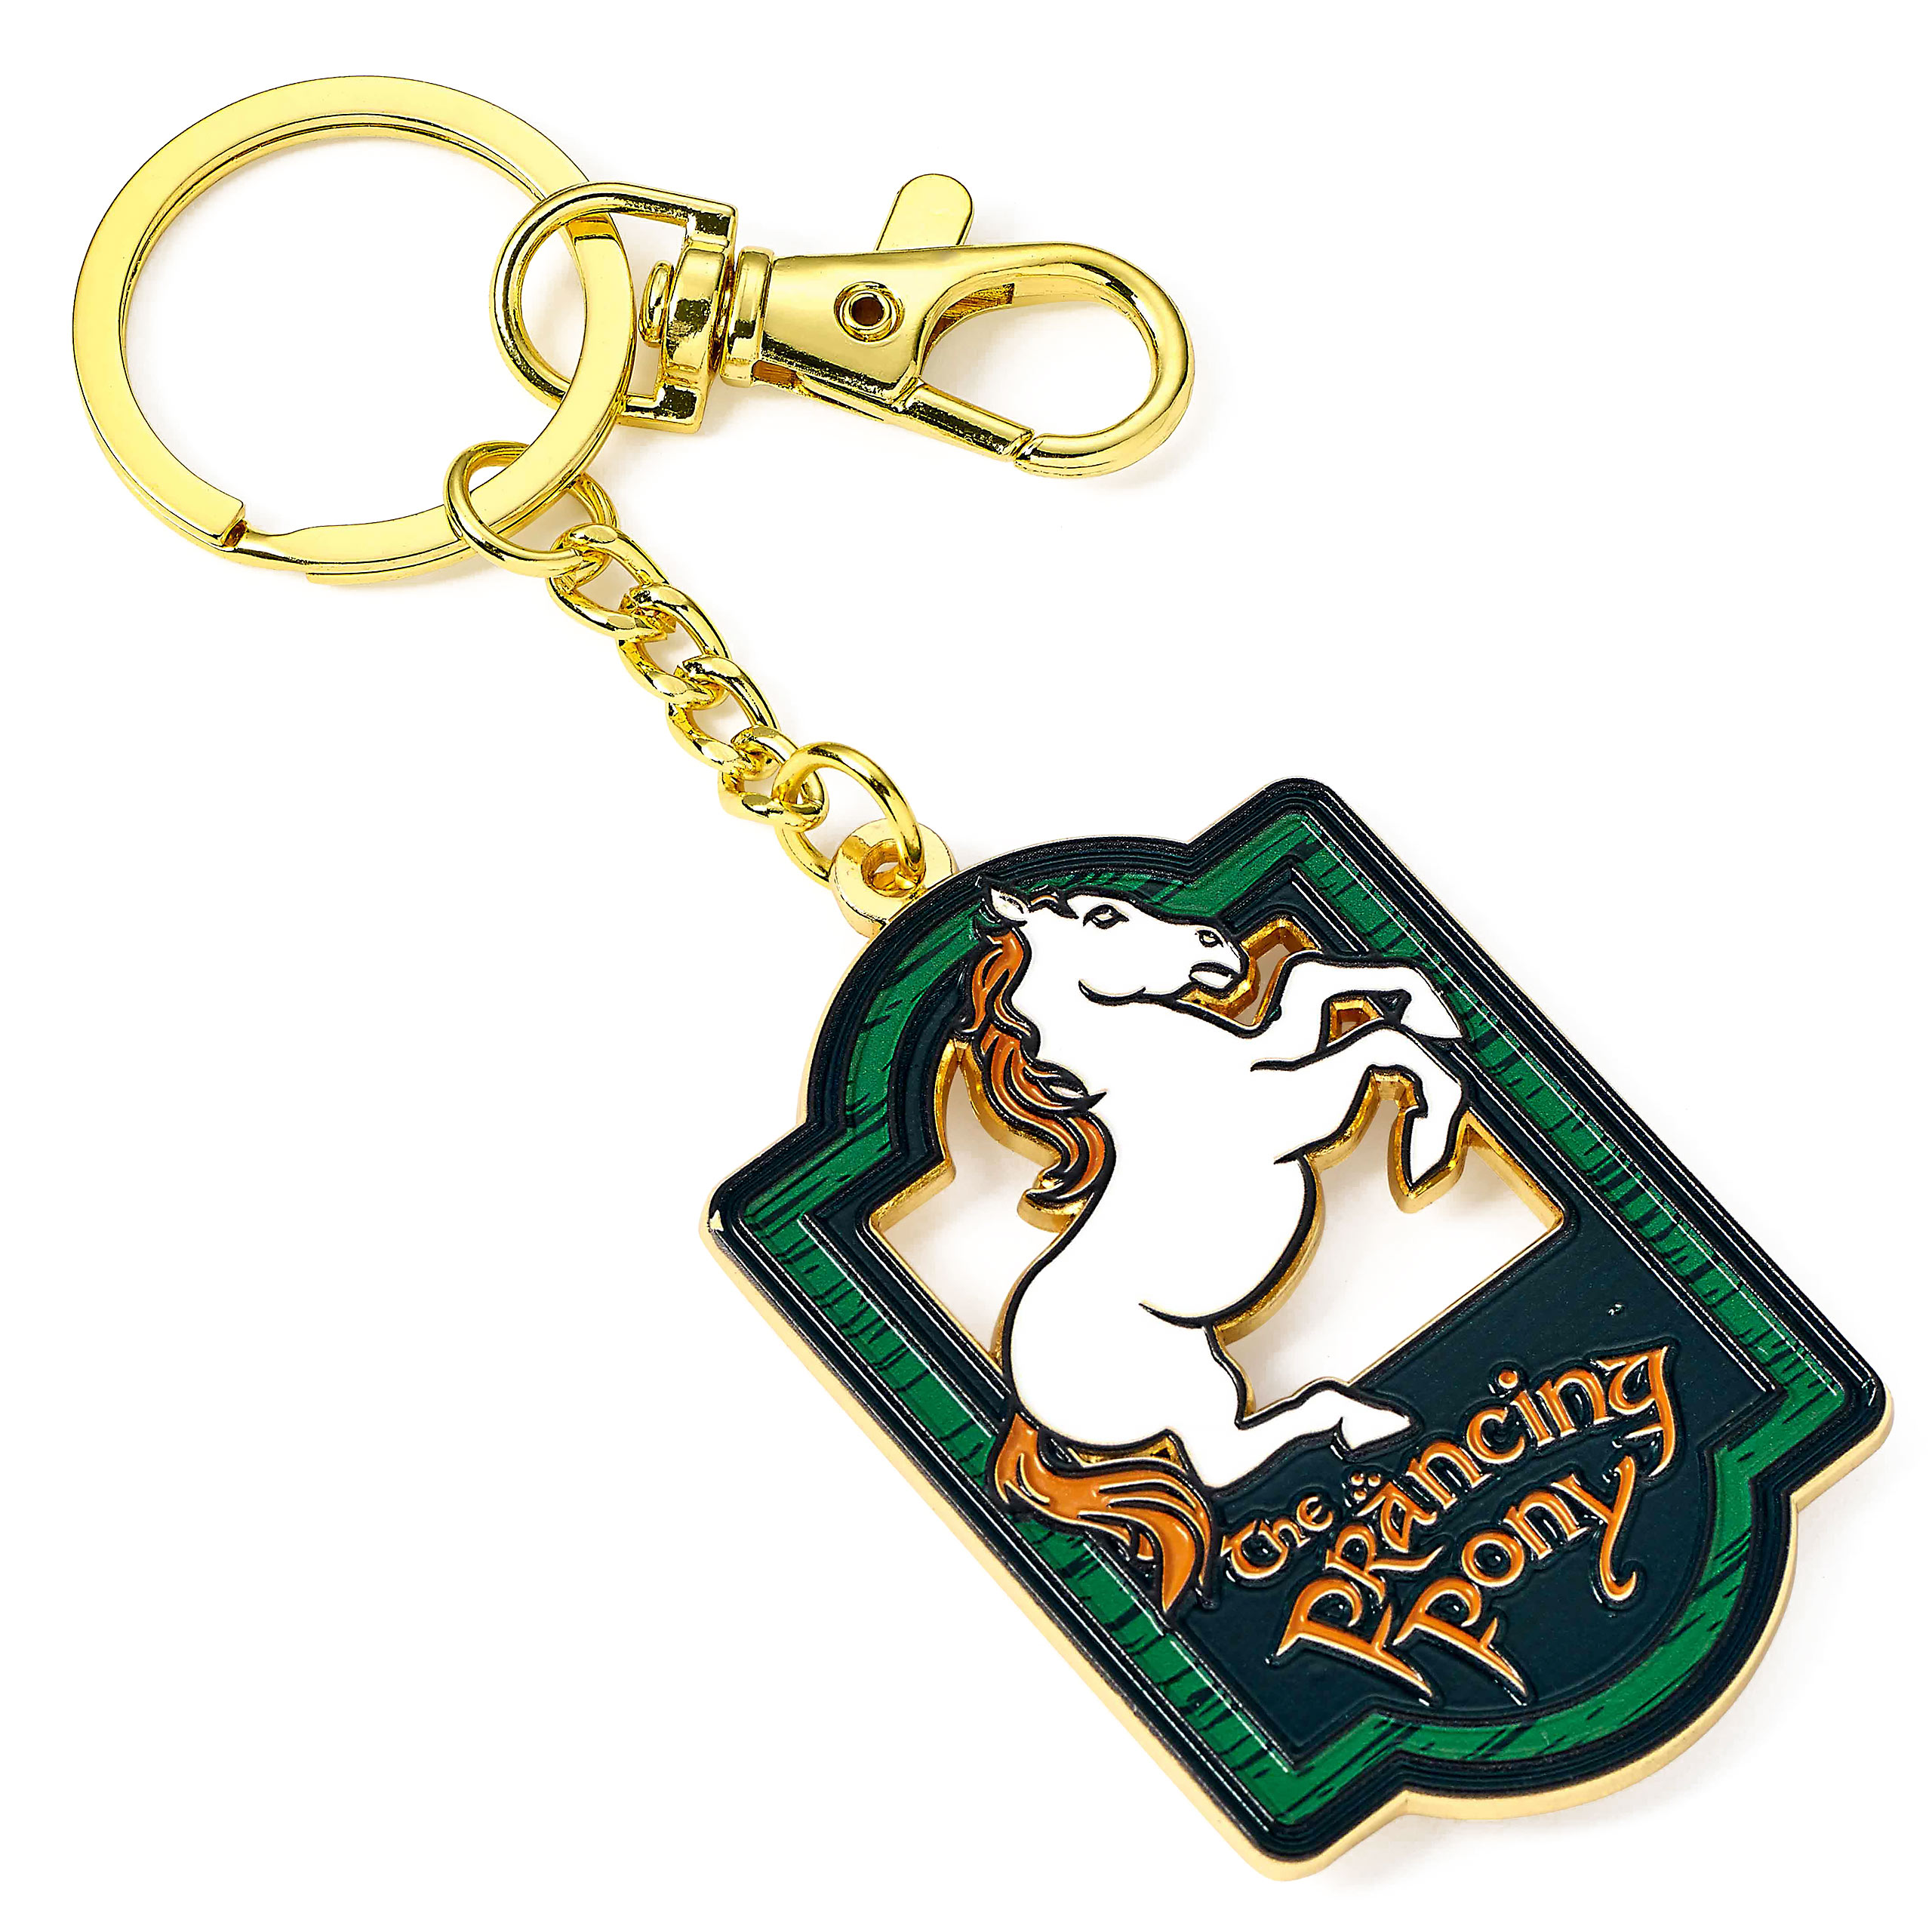 Prancing Pony Keychain - Lord of the Rings